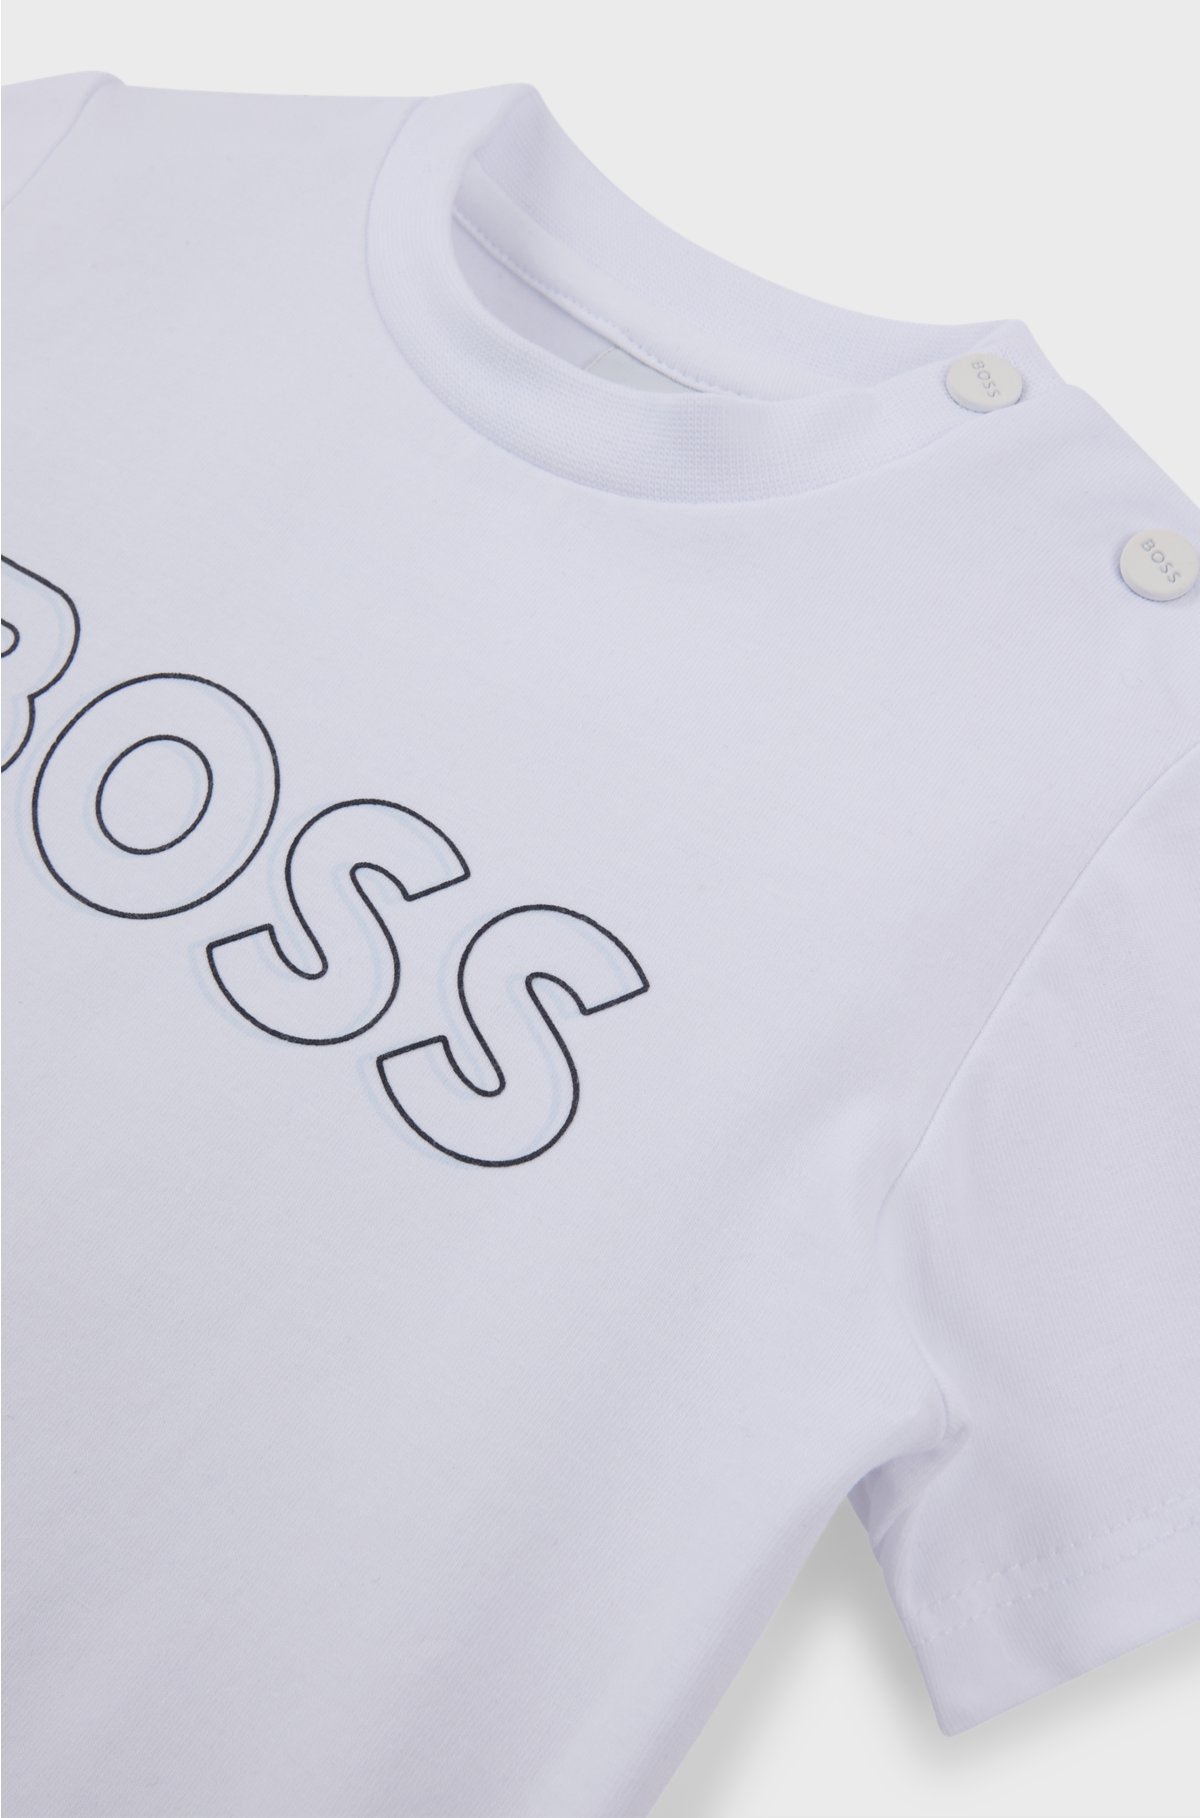 Kids' T-shirt in cotton jersey with embossed logo print, White